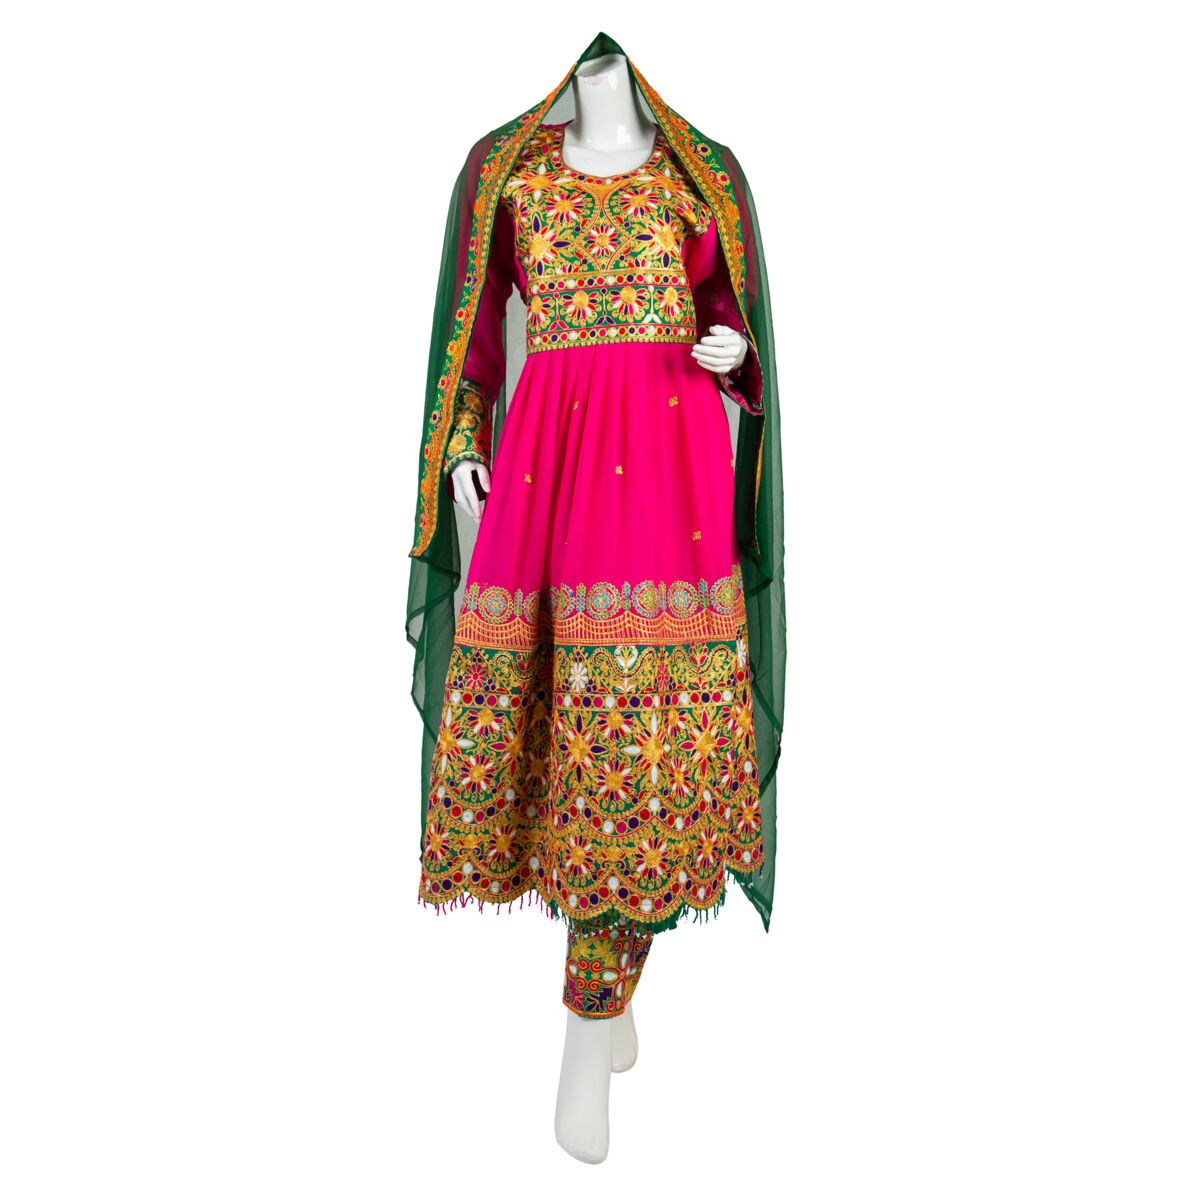 Light Pink Party Dress | Damandar Afghani with Multi-Colored Embroidery on Sleeves/Chest/Skirt Lining